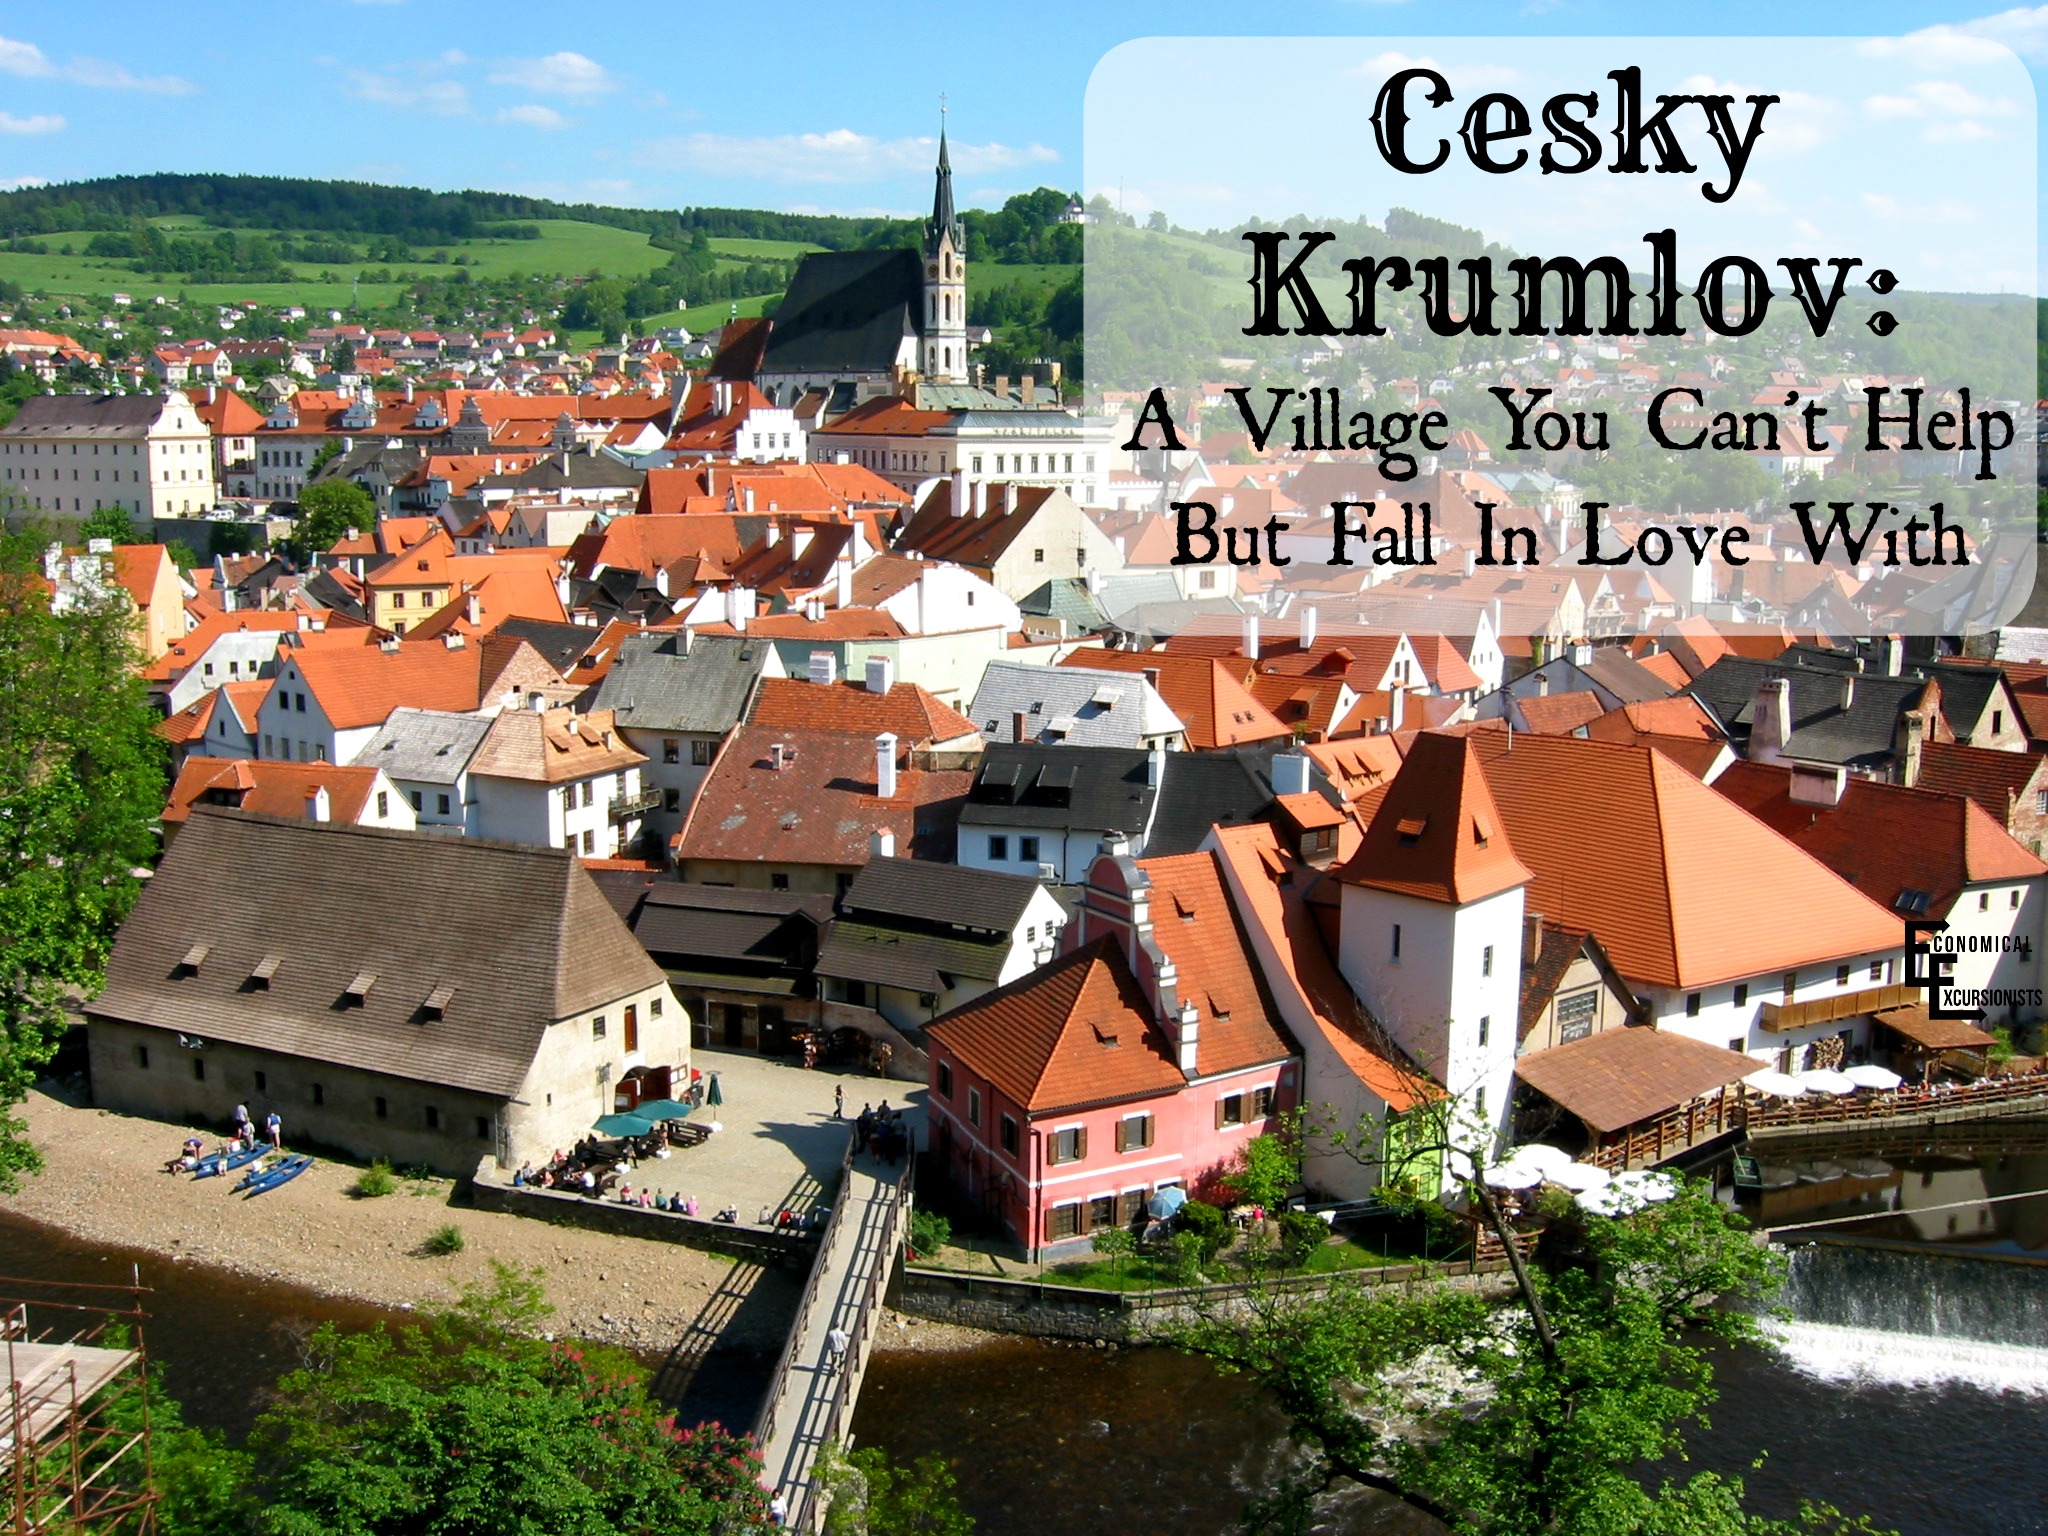 If you haven't been to Cesky Krumlov, you are missing out!